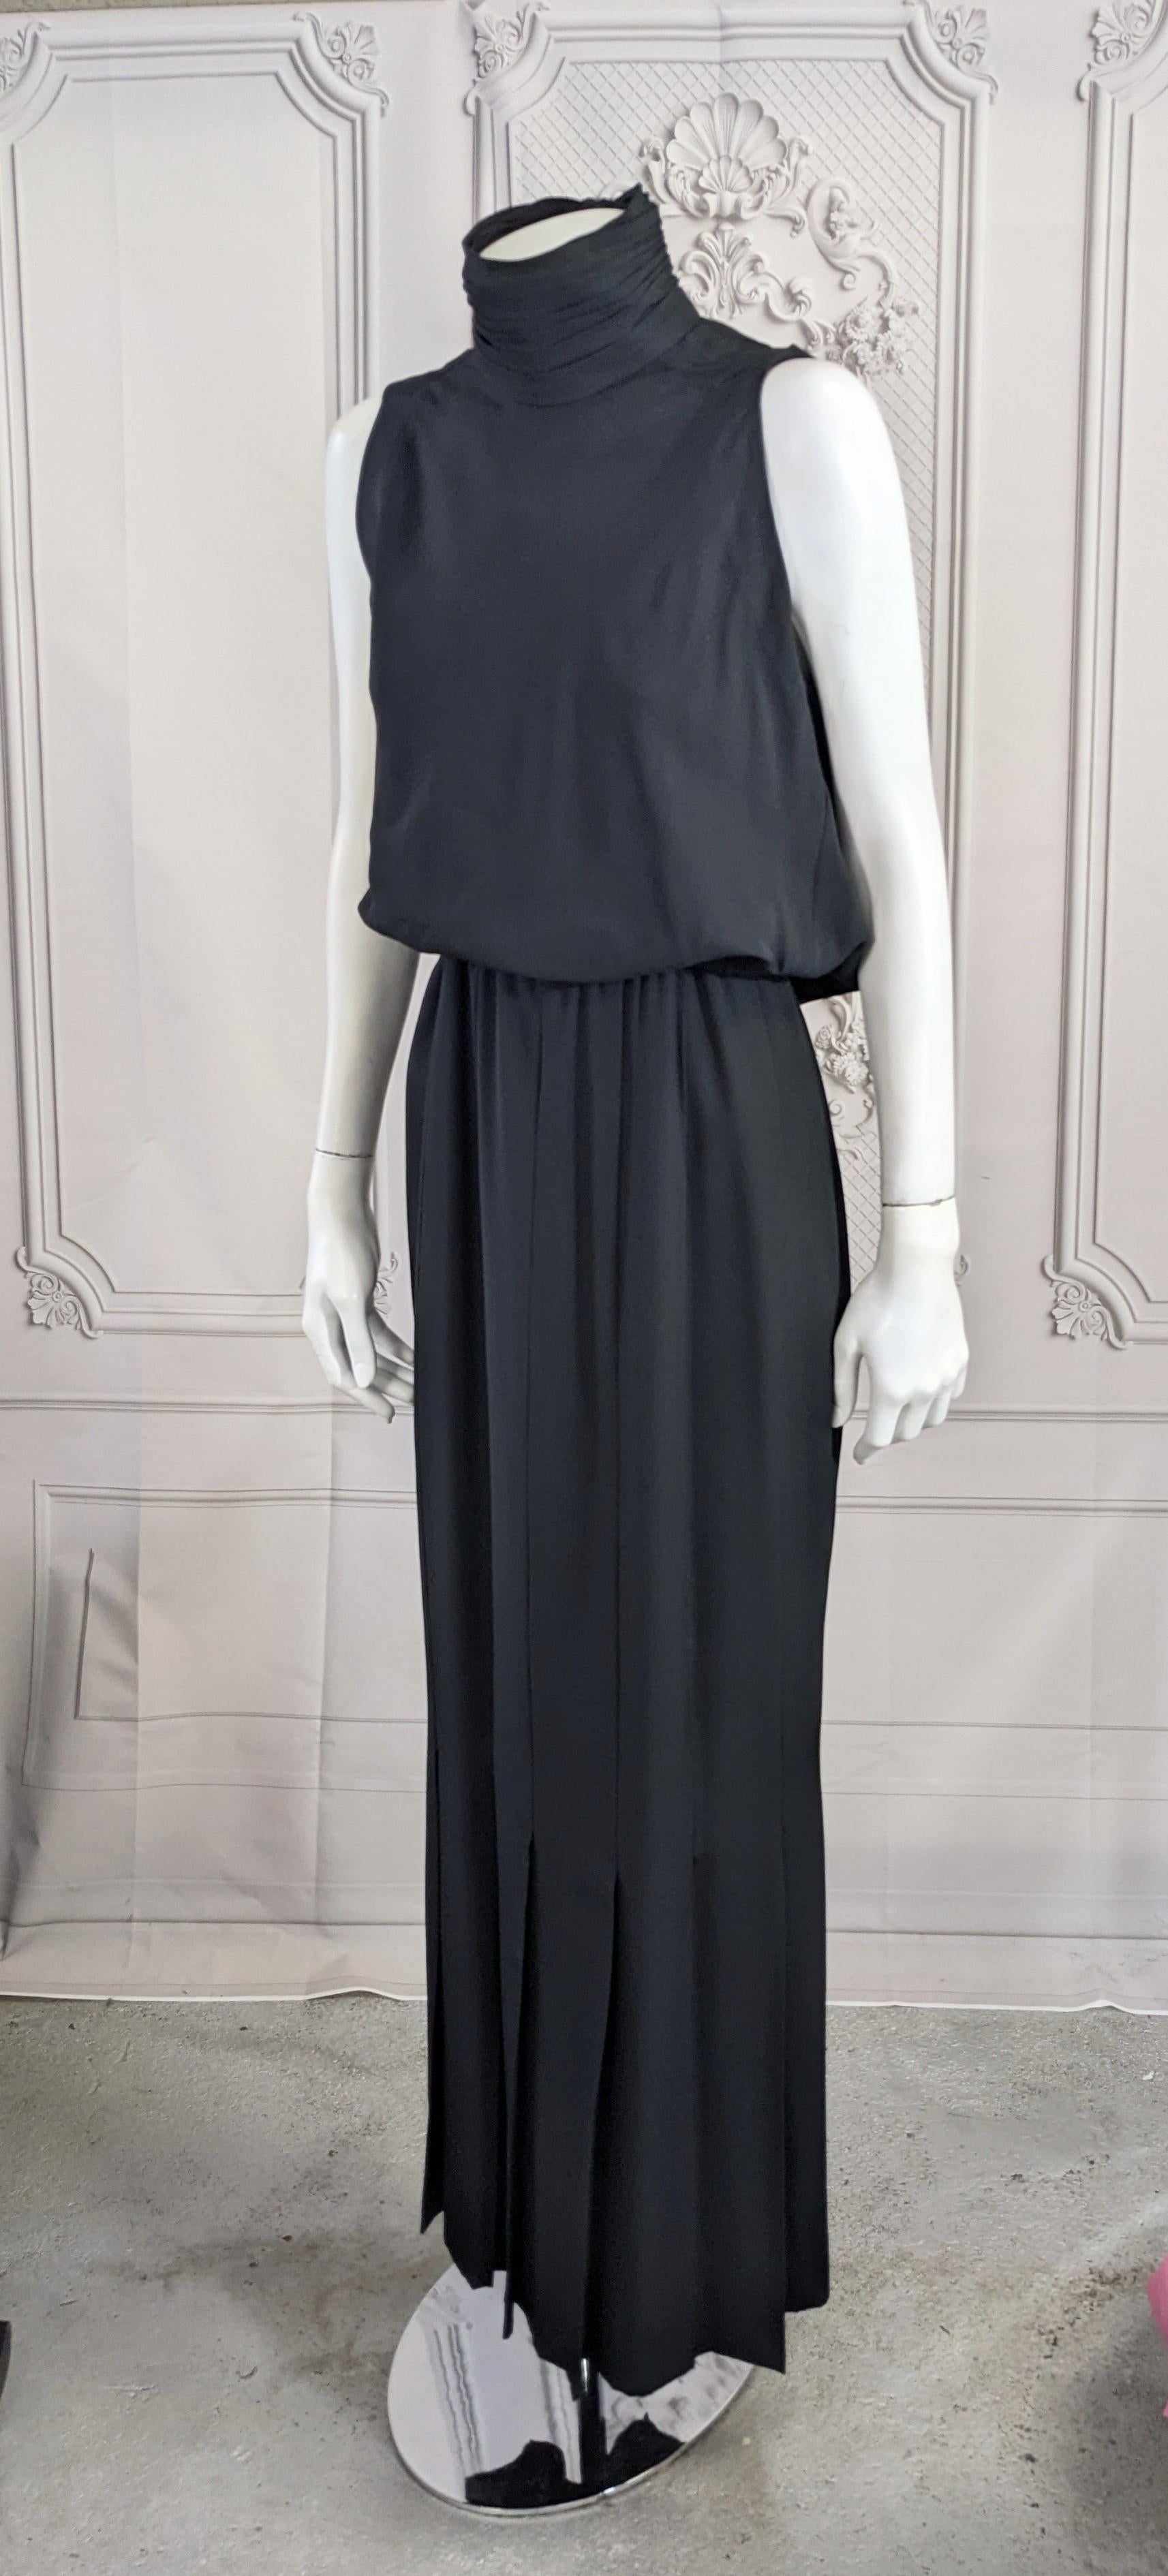 Iconic Chanel High Neck Column Heavy Silk Crepe Gown from the 1980's by Karl Lagerfeld. High collar is ruched, pleated and fastened with CC logo buttons. One piece gown with sleeveless blouson bodice with long tucks on skirt which release to pleats